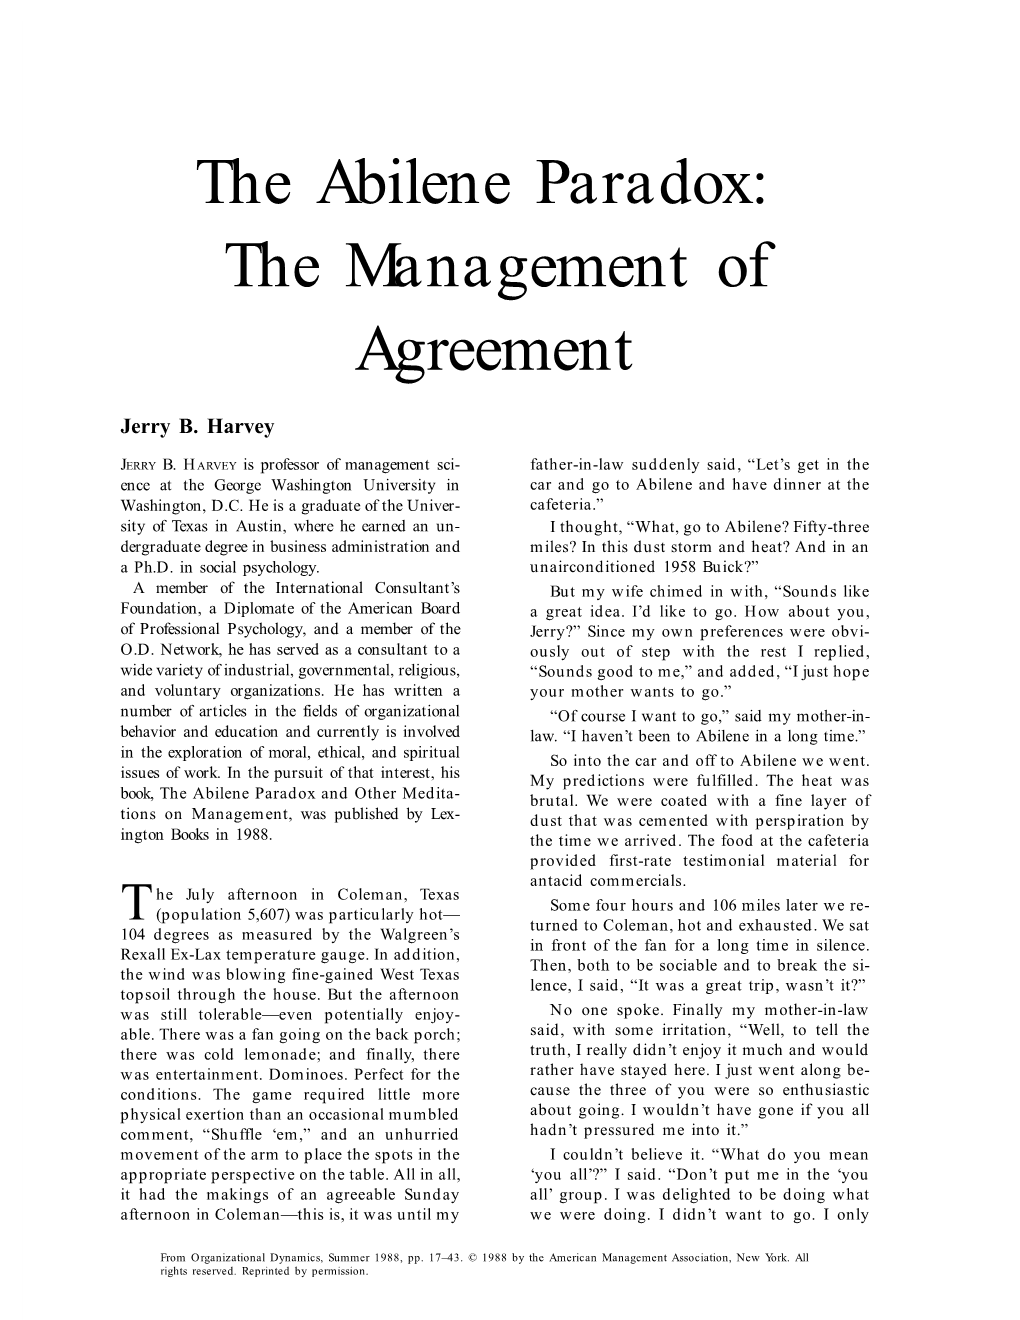 The Abilene Paradox: the Management of Agreement